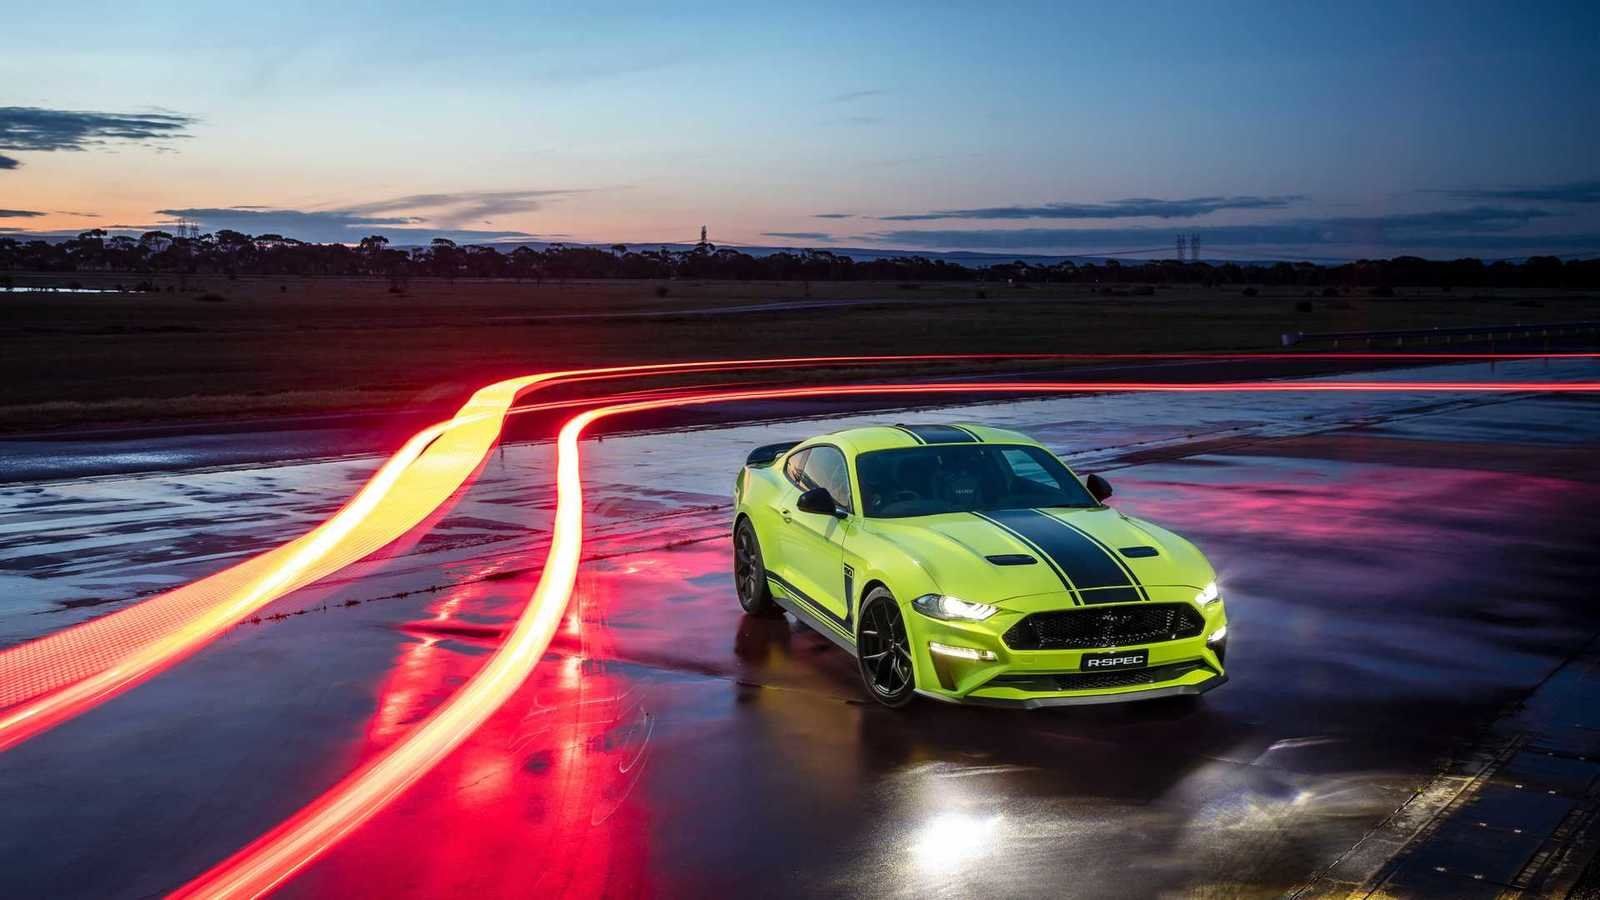 Wallpaper Of The Day: 2020 Ford Mustang R Spec Picture, Photo, Wallpaper